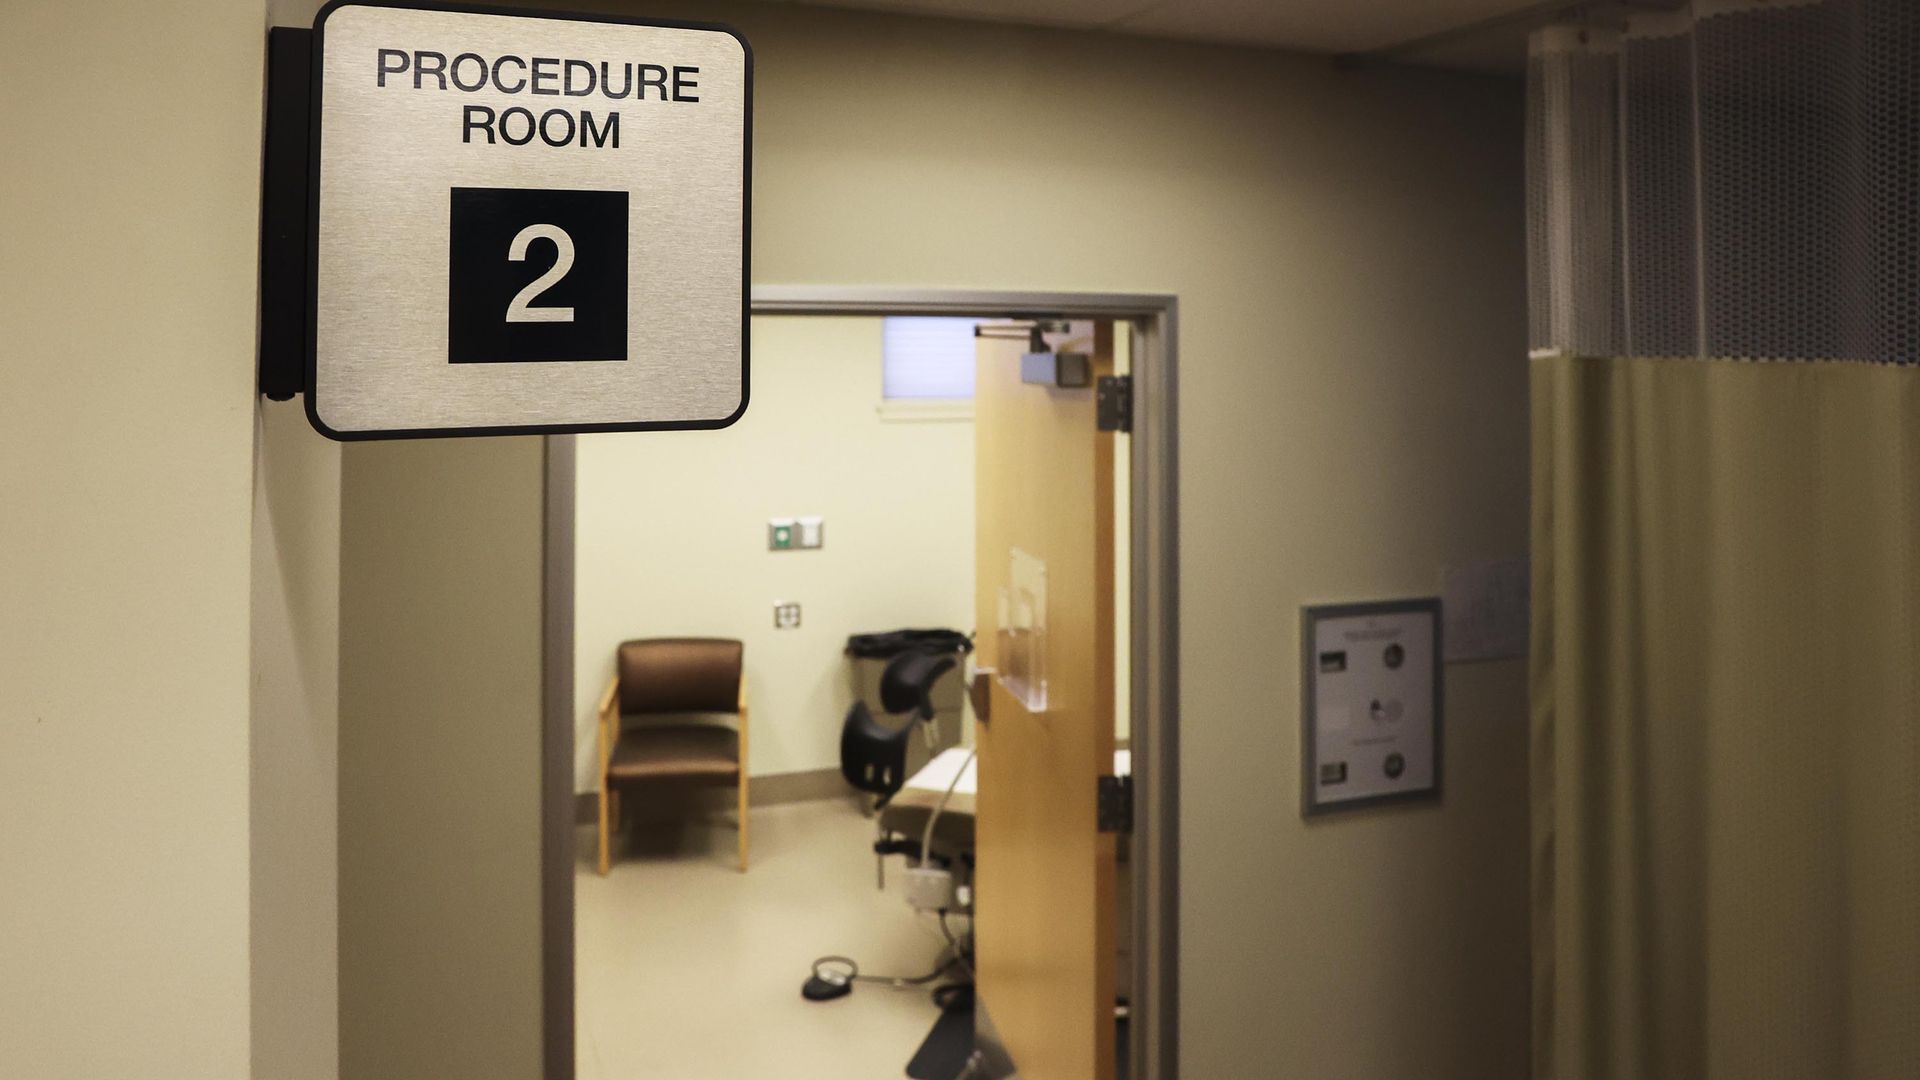 Photo of a procedure room in a hospital, showing a bed and chair